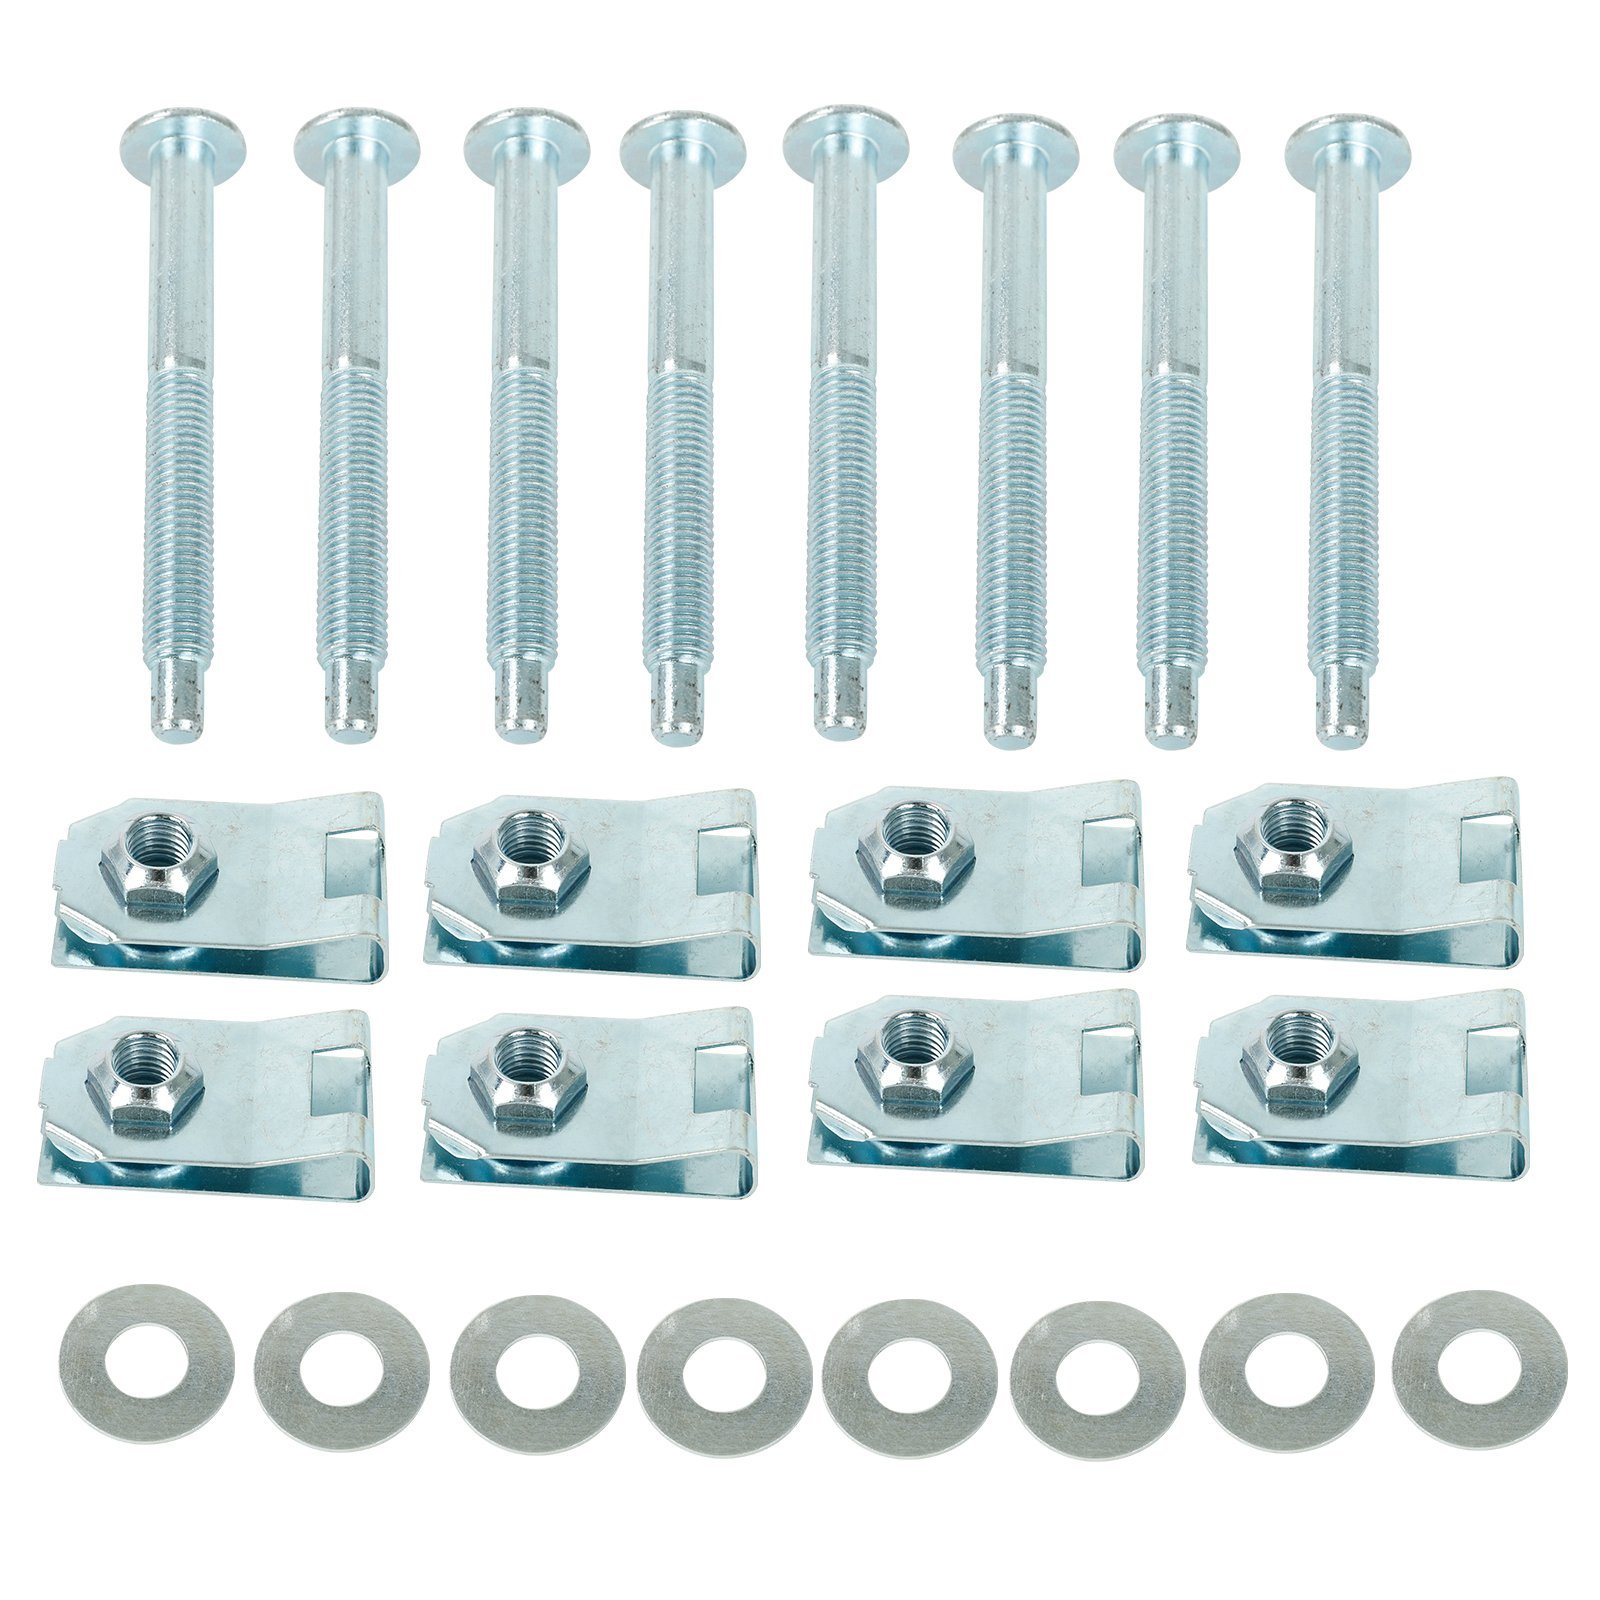 For Ford F250 F350 F450 F550 1999-2014 Truck Bed Mounting Bolt Nut Hardware Kit